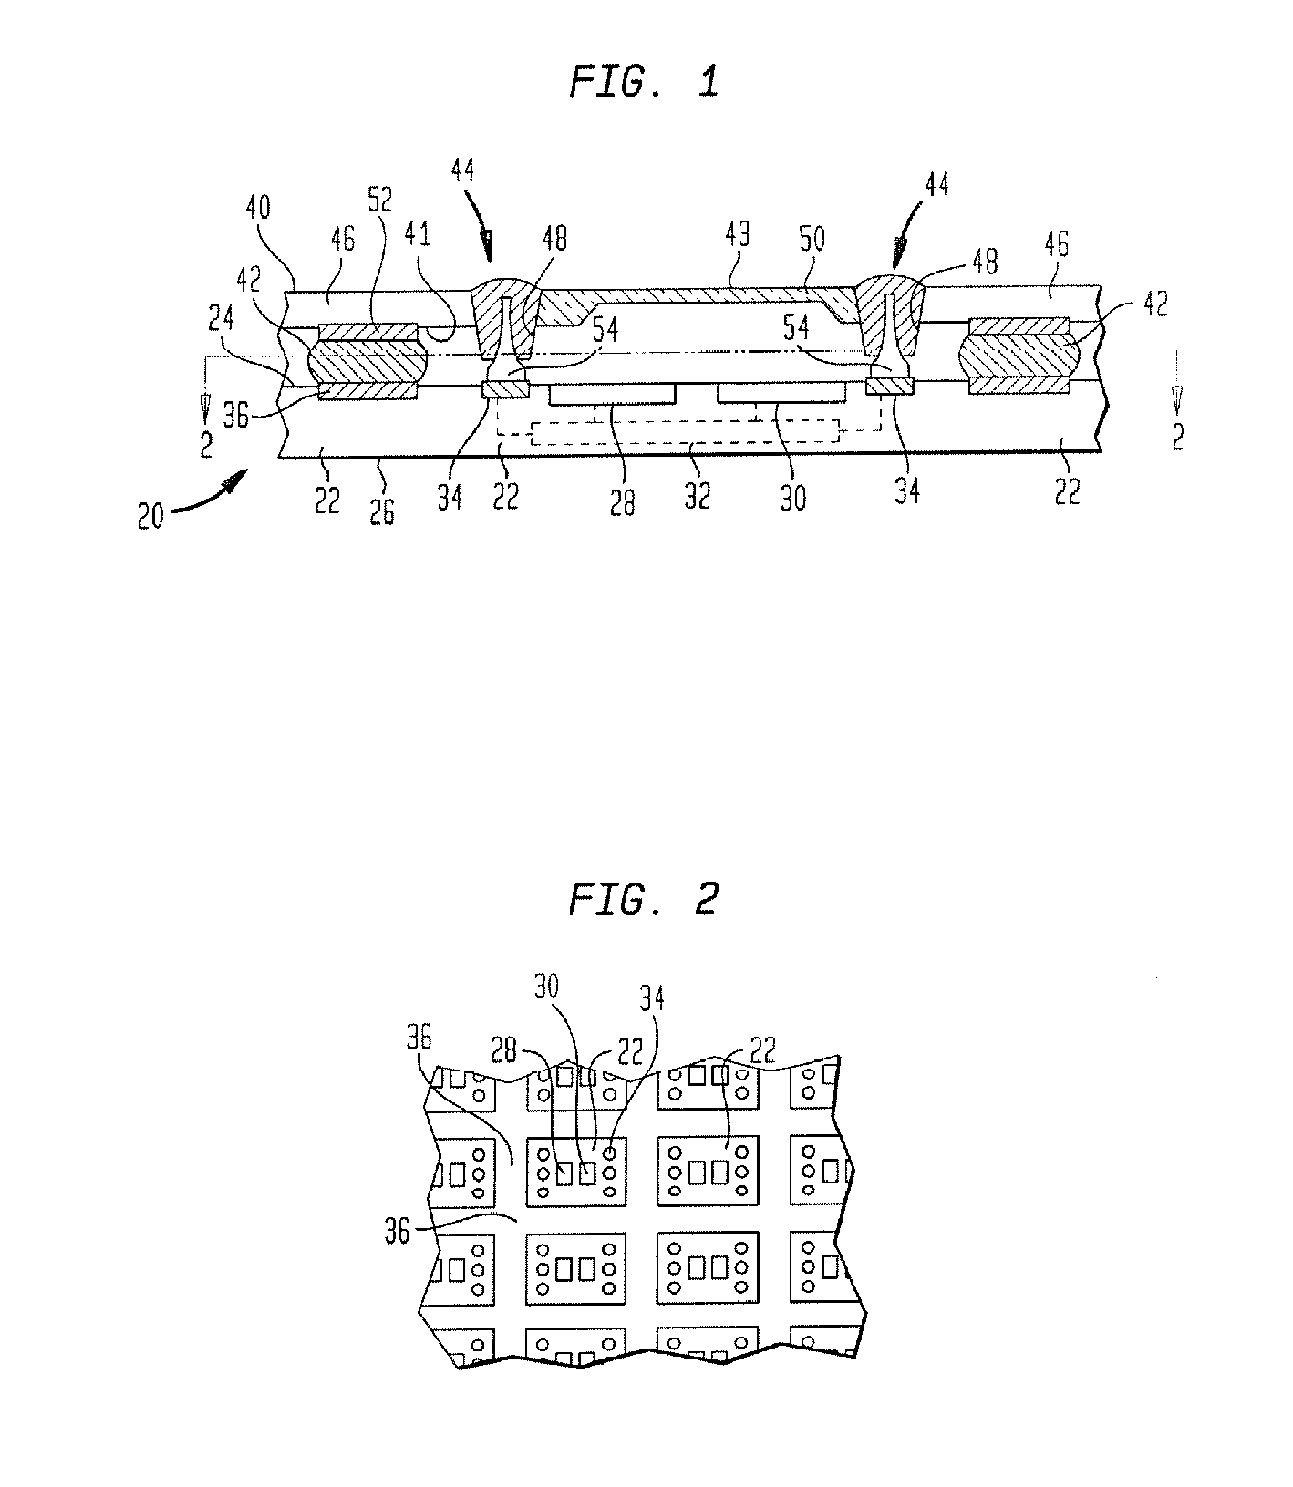 Wafer level microelectronic packaging with double isolation